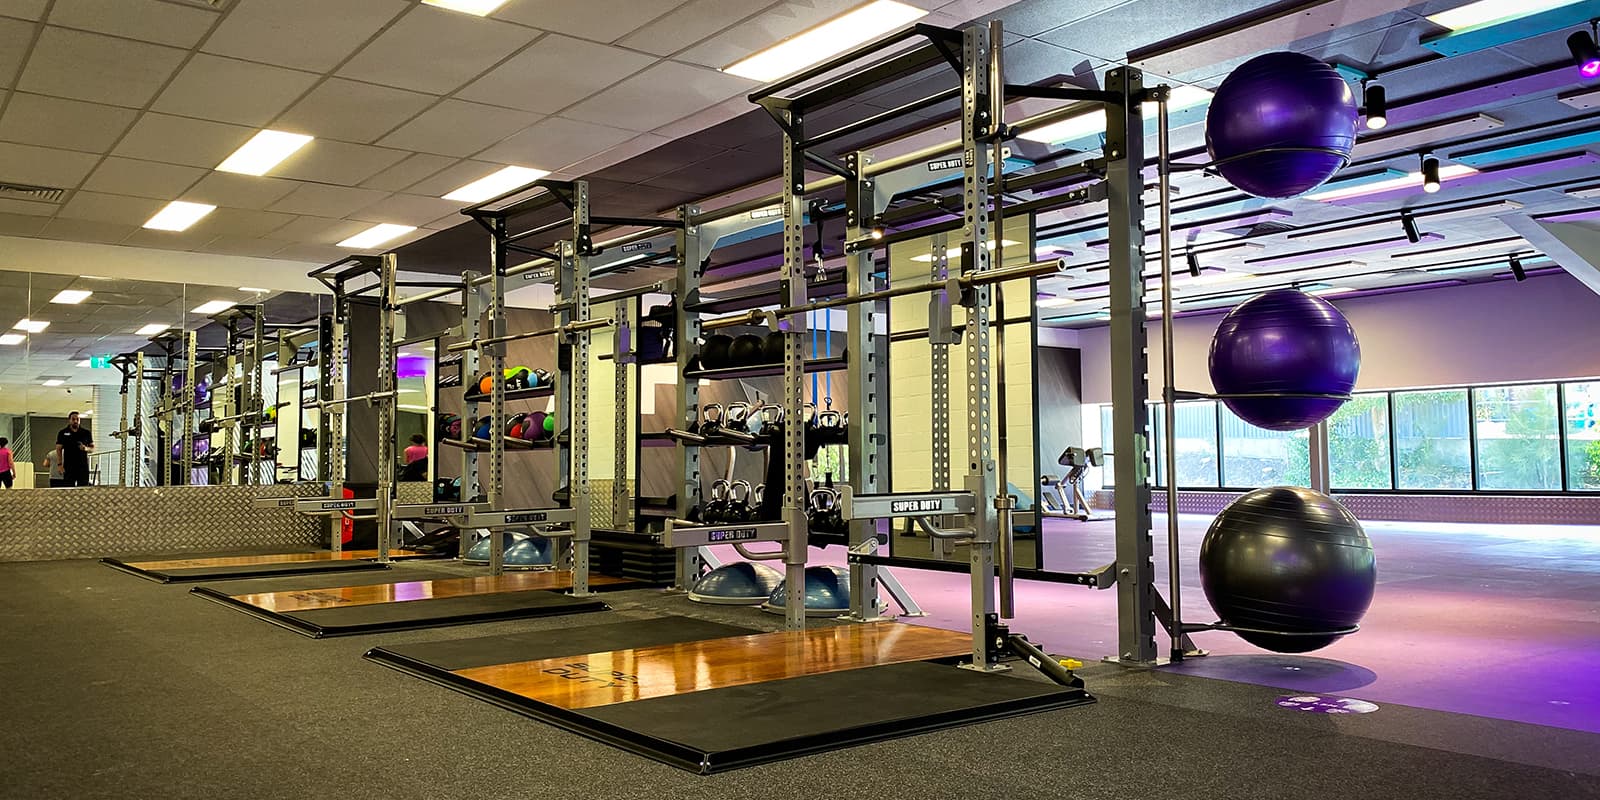 15 Minute Anytime fitness 24 hours near me for Gym